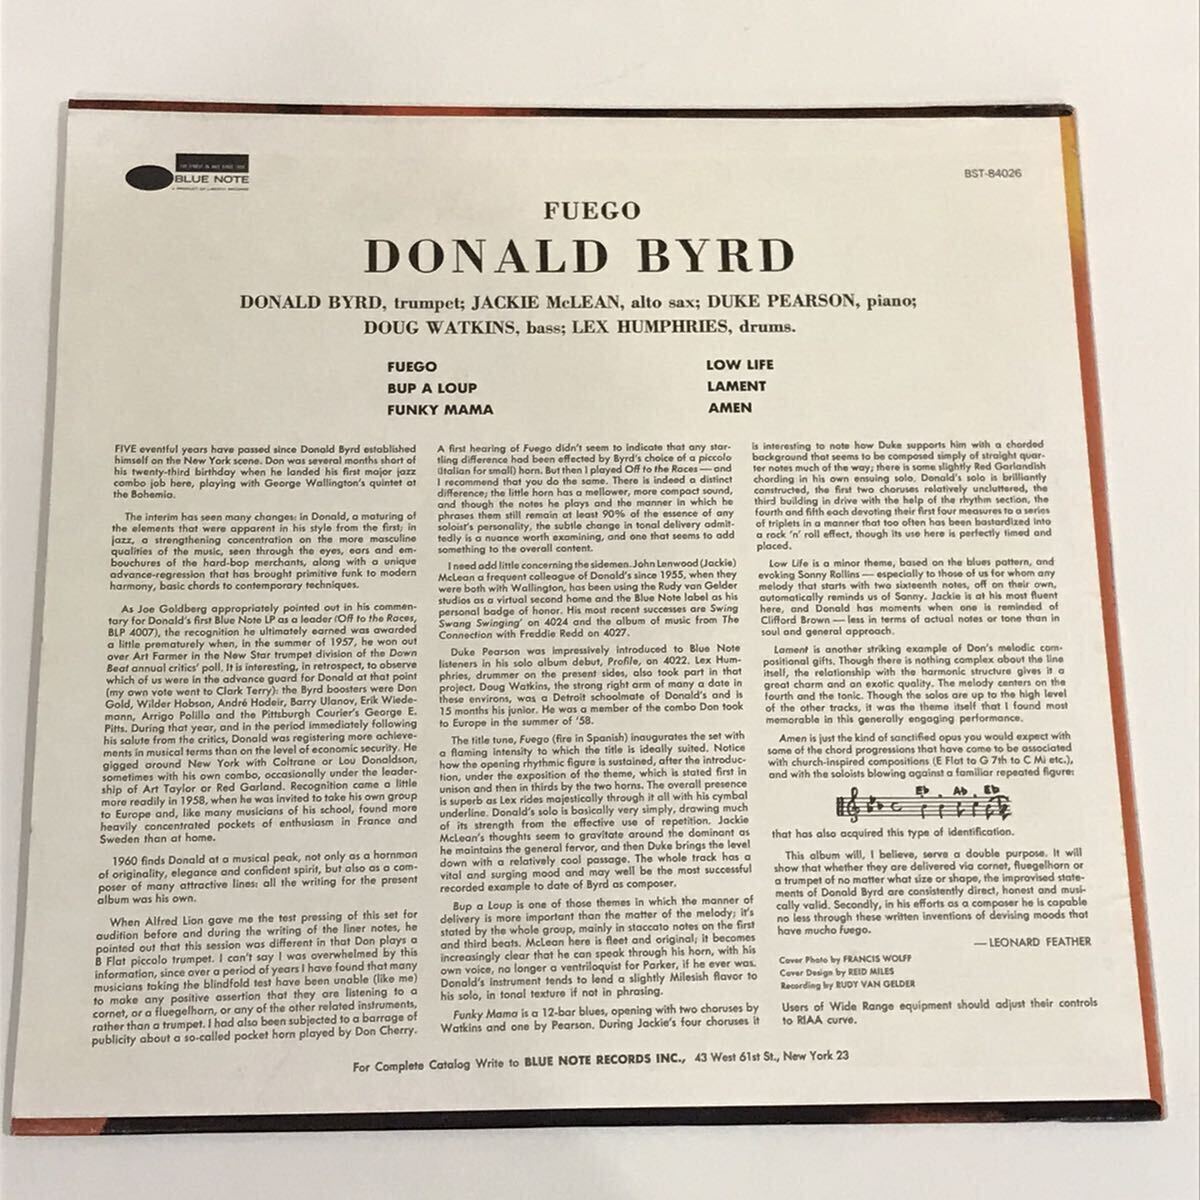 “RVG”刻印入り US盤 DINALD BYRD / FUEGO on BLUE NOTE RECORDS JACKIE McLEAN DUKE PEARSON DOUG WATKINS LEX HUMPHRIES EX+_画像2